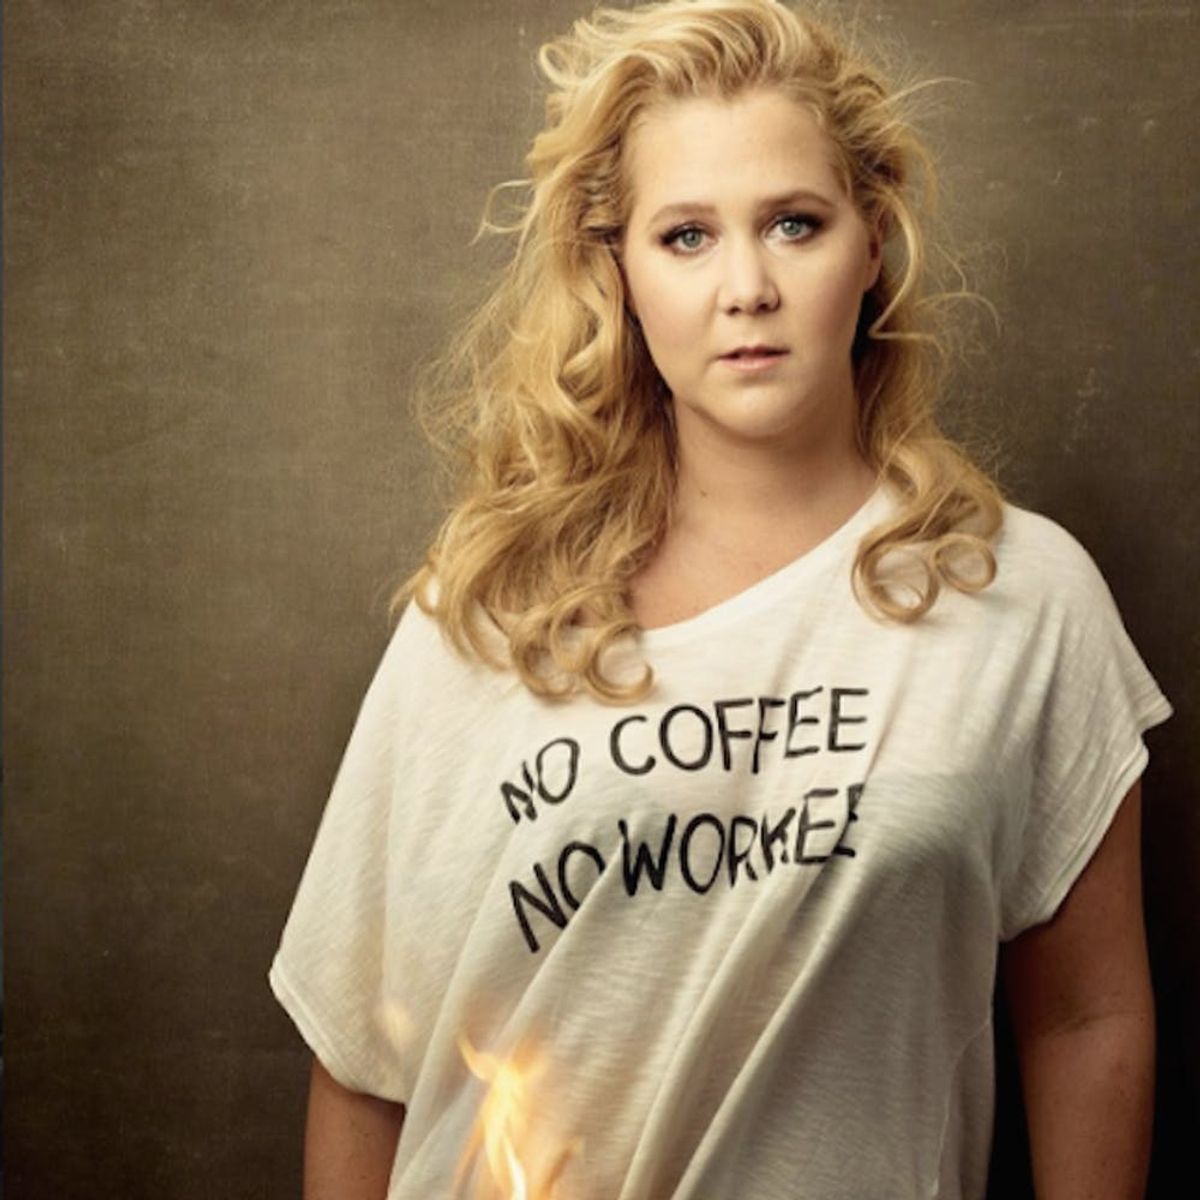 Morning Buzz! Amy Schumer Admits the Most Meaningful Thing About Her New Vanity Fair Cover